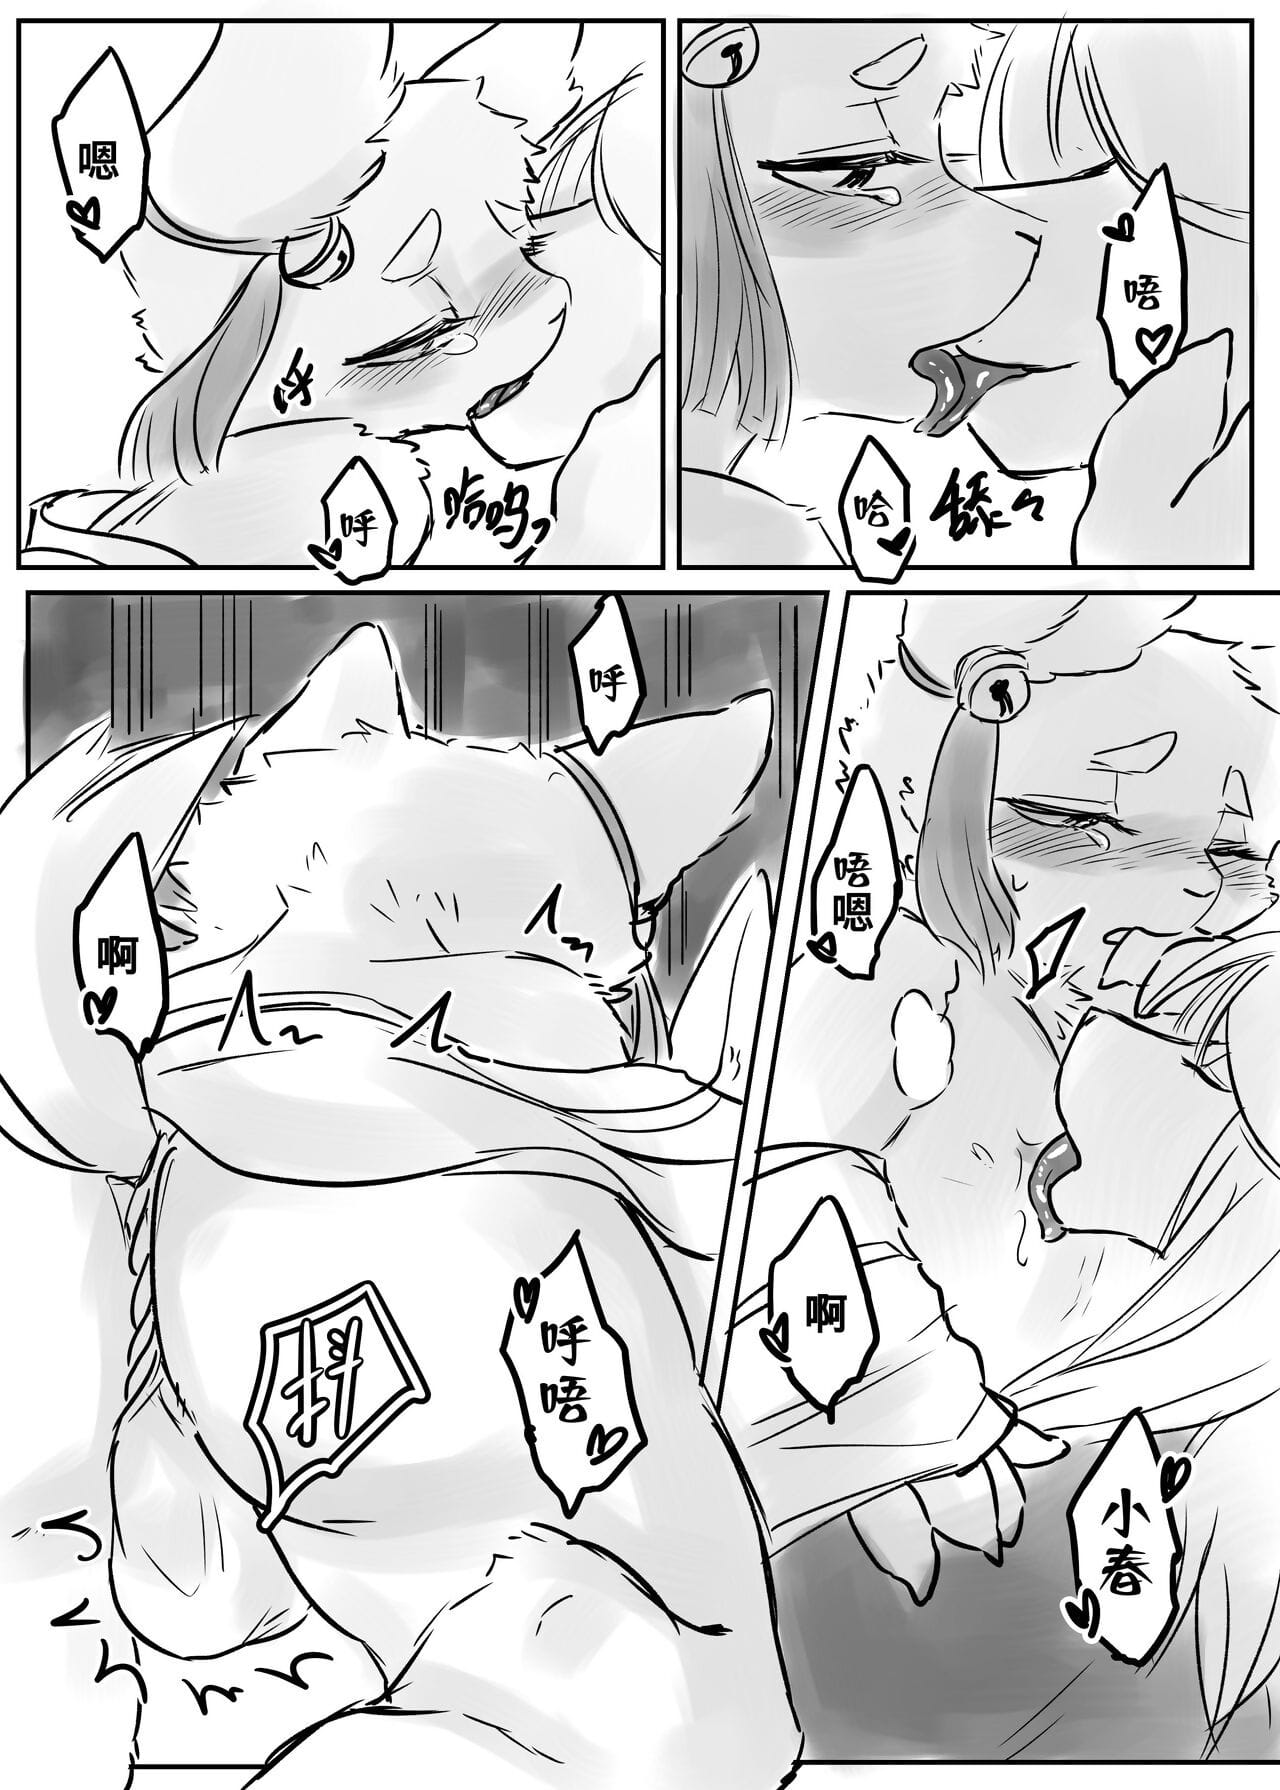 （the 访客 他乡之人 by：鬼流 一部分 3 page 1